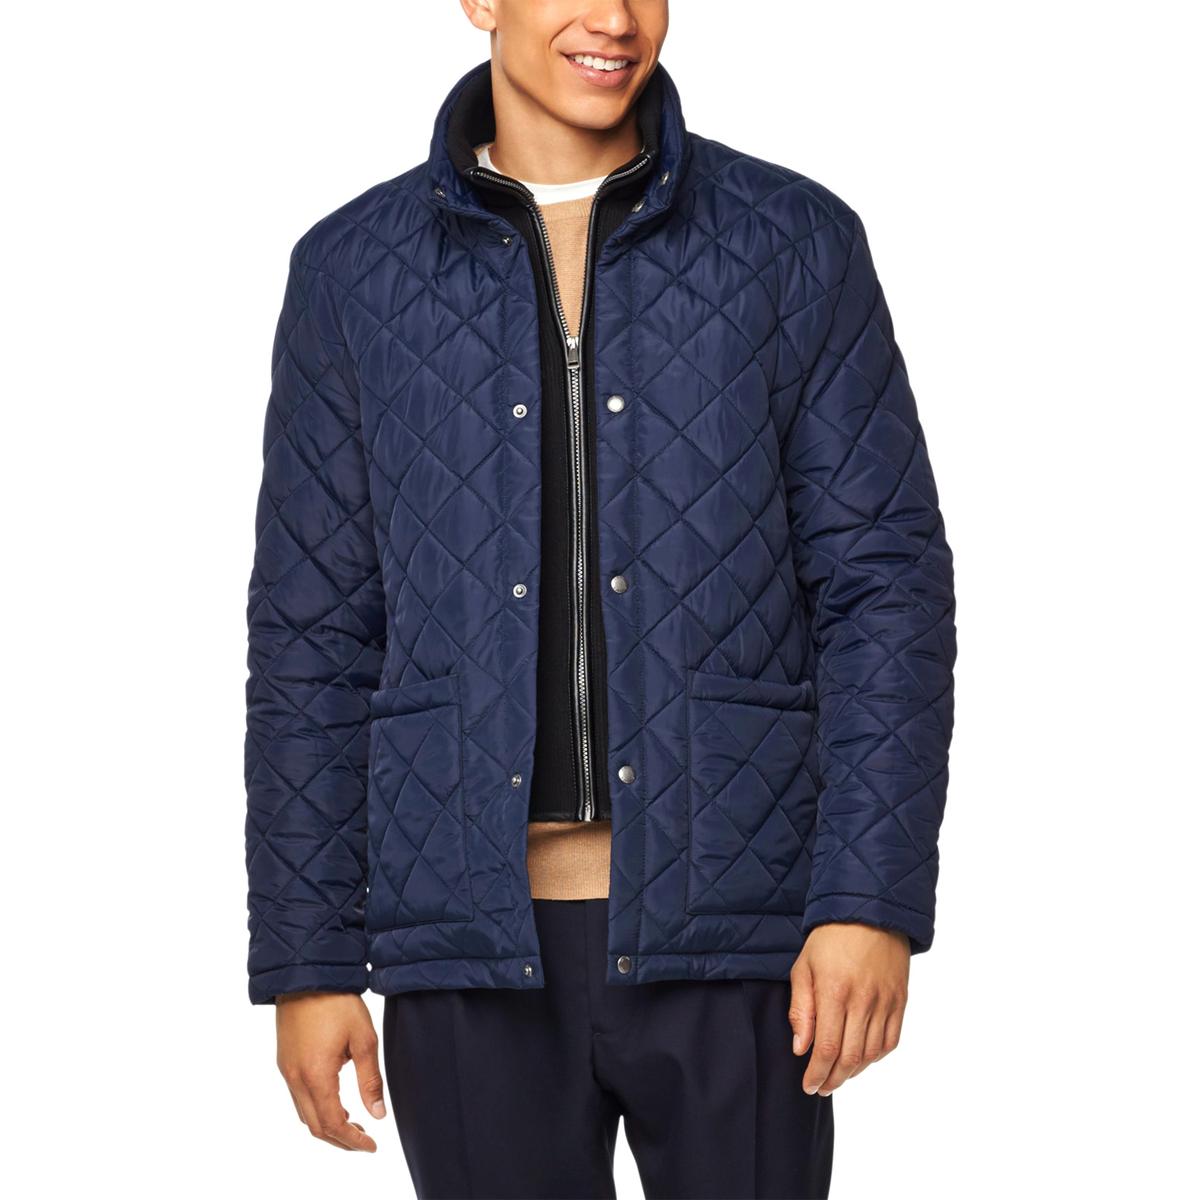 Cole Haan Mens Navy Winter Quilted Warm Coat Outerwear M BHFO 5497 ...